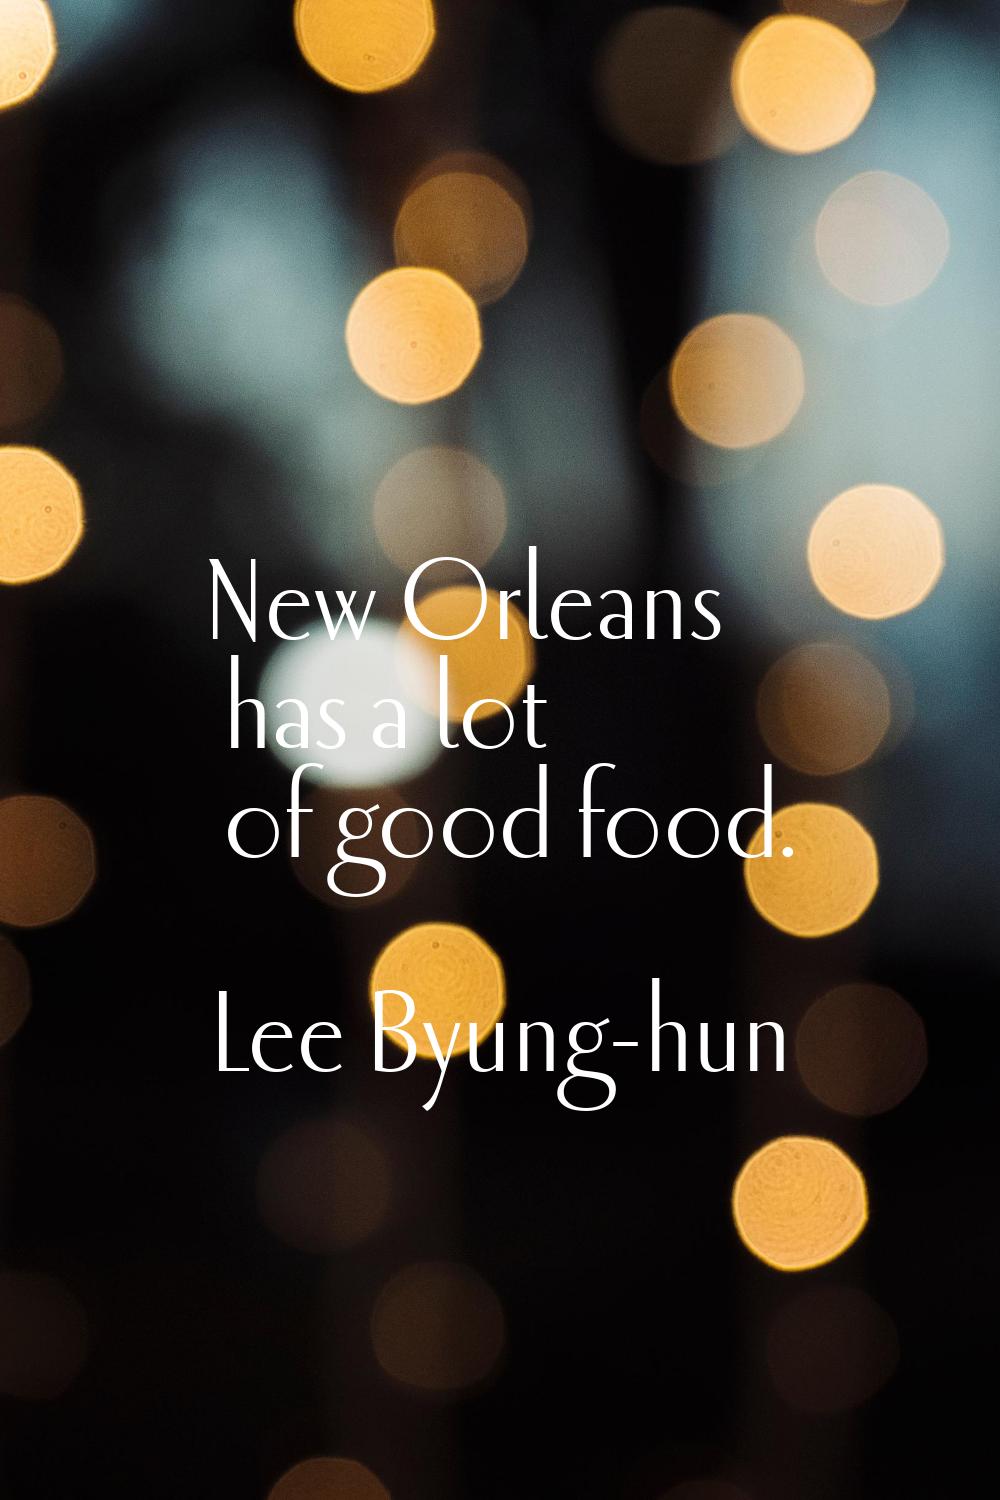 New Orleans has a lot of good food.